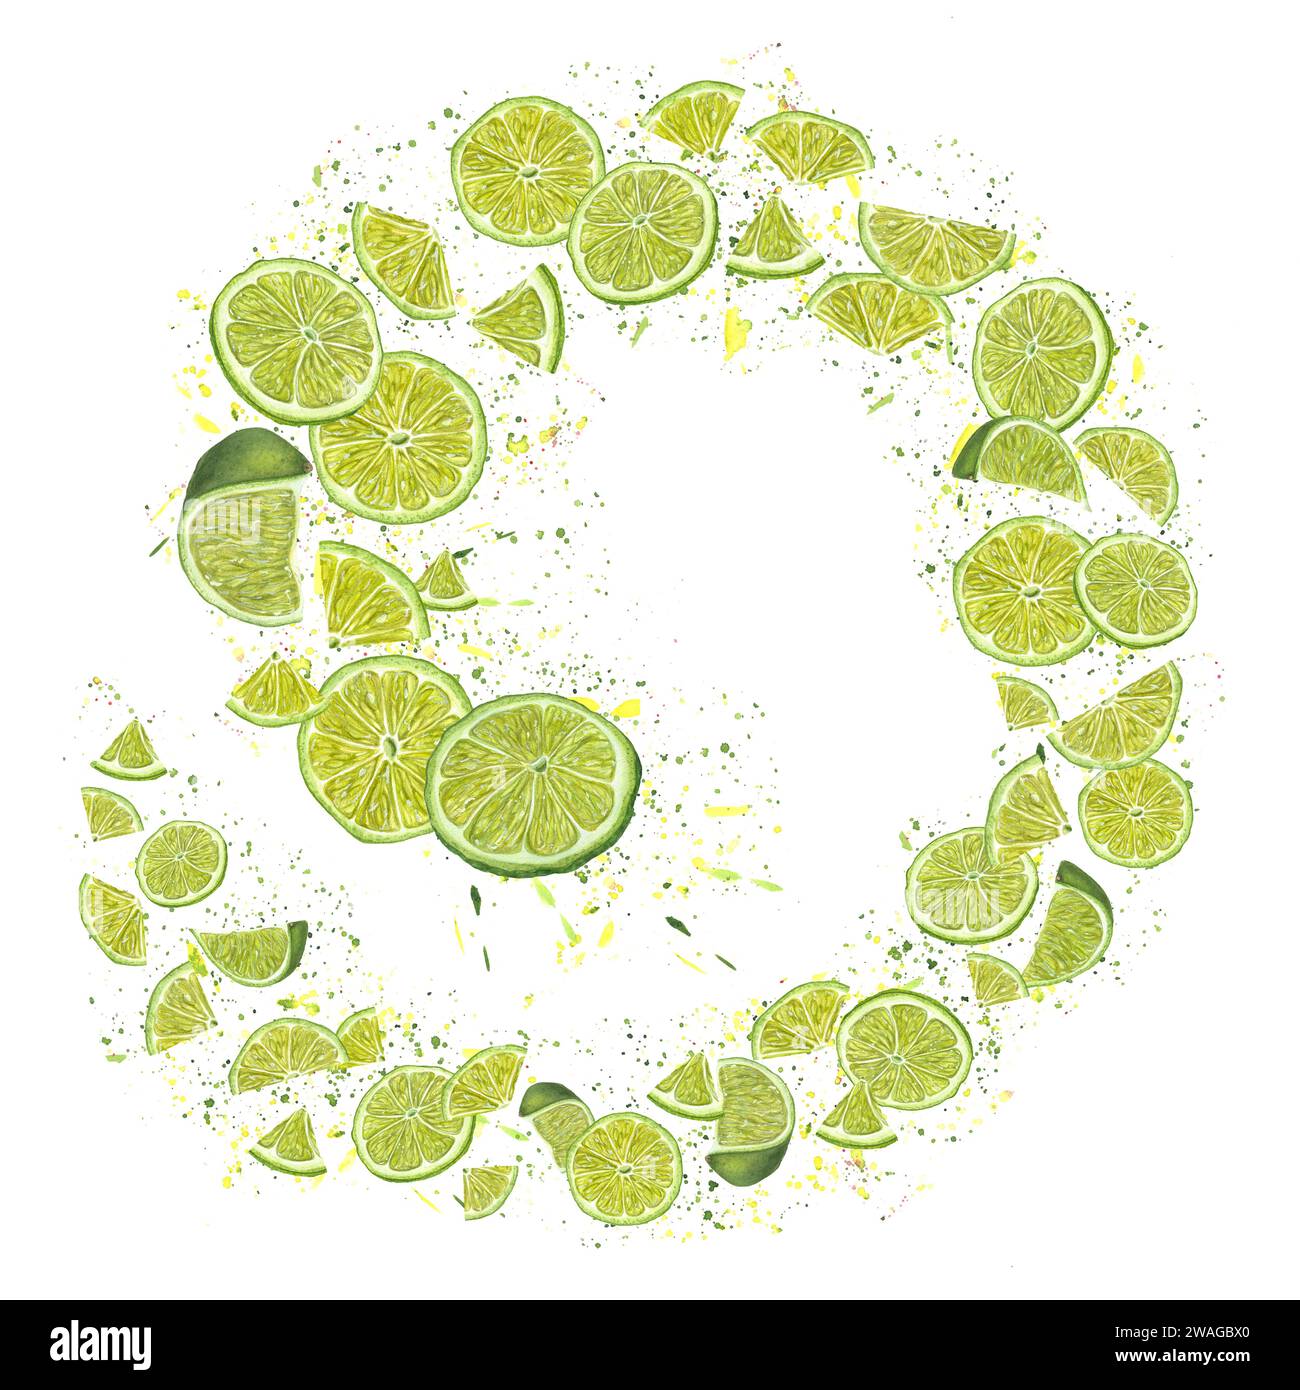 Swirl of lime slices in circular spiral. Ripe citrus fruits on background of splashes of juice. Colored confetti, flying abstract dots. Stock Photo